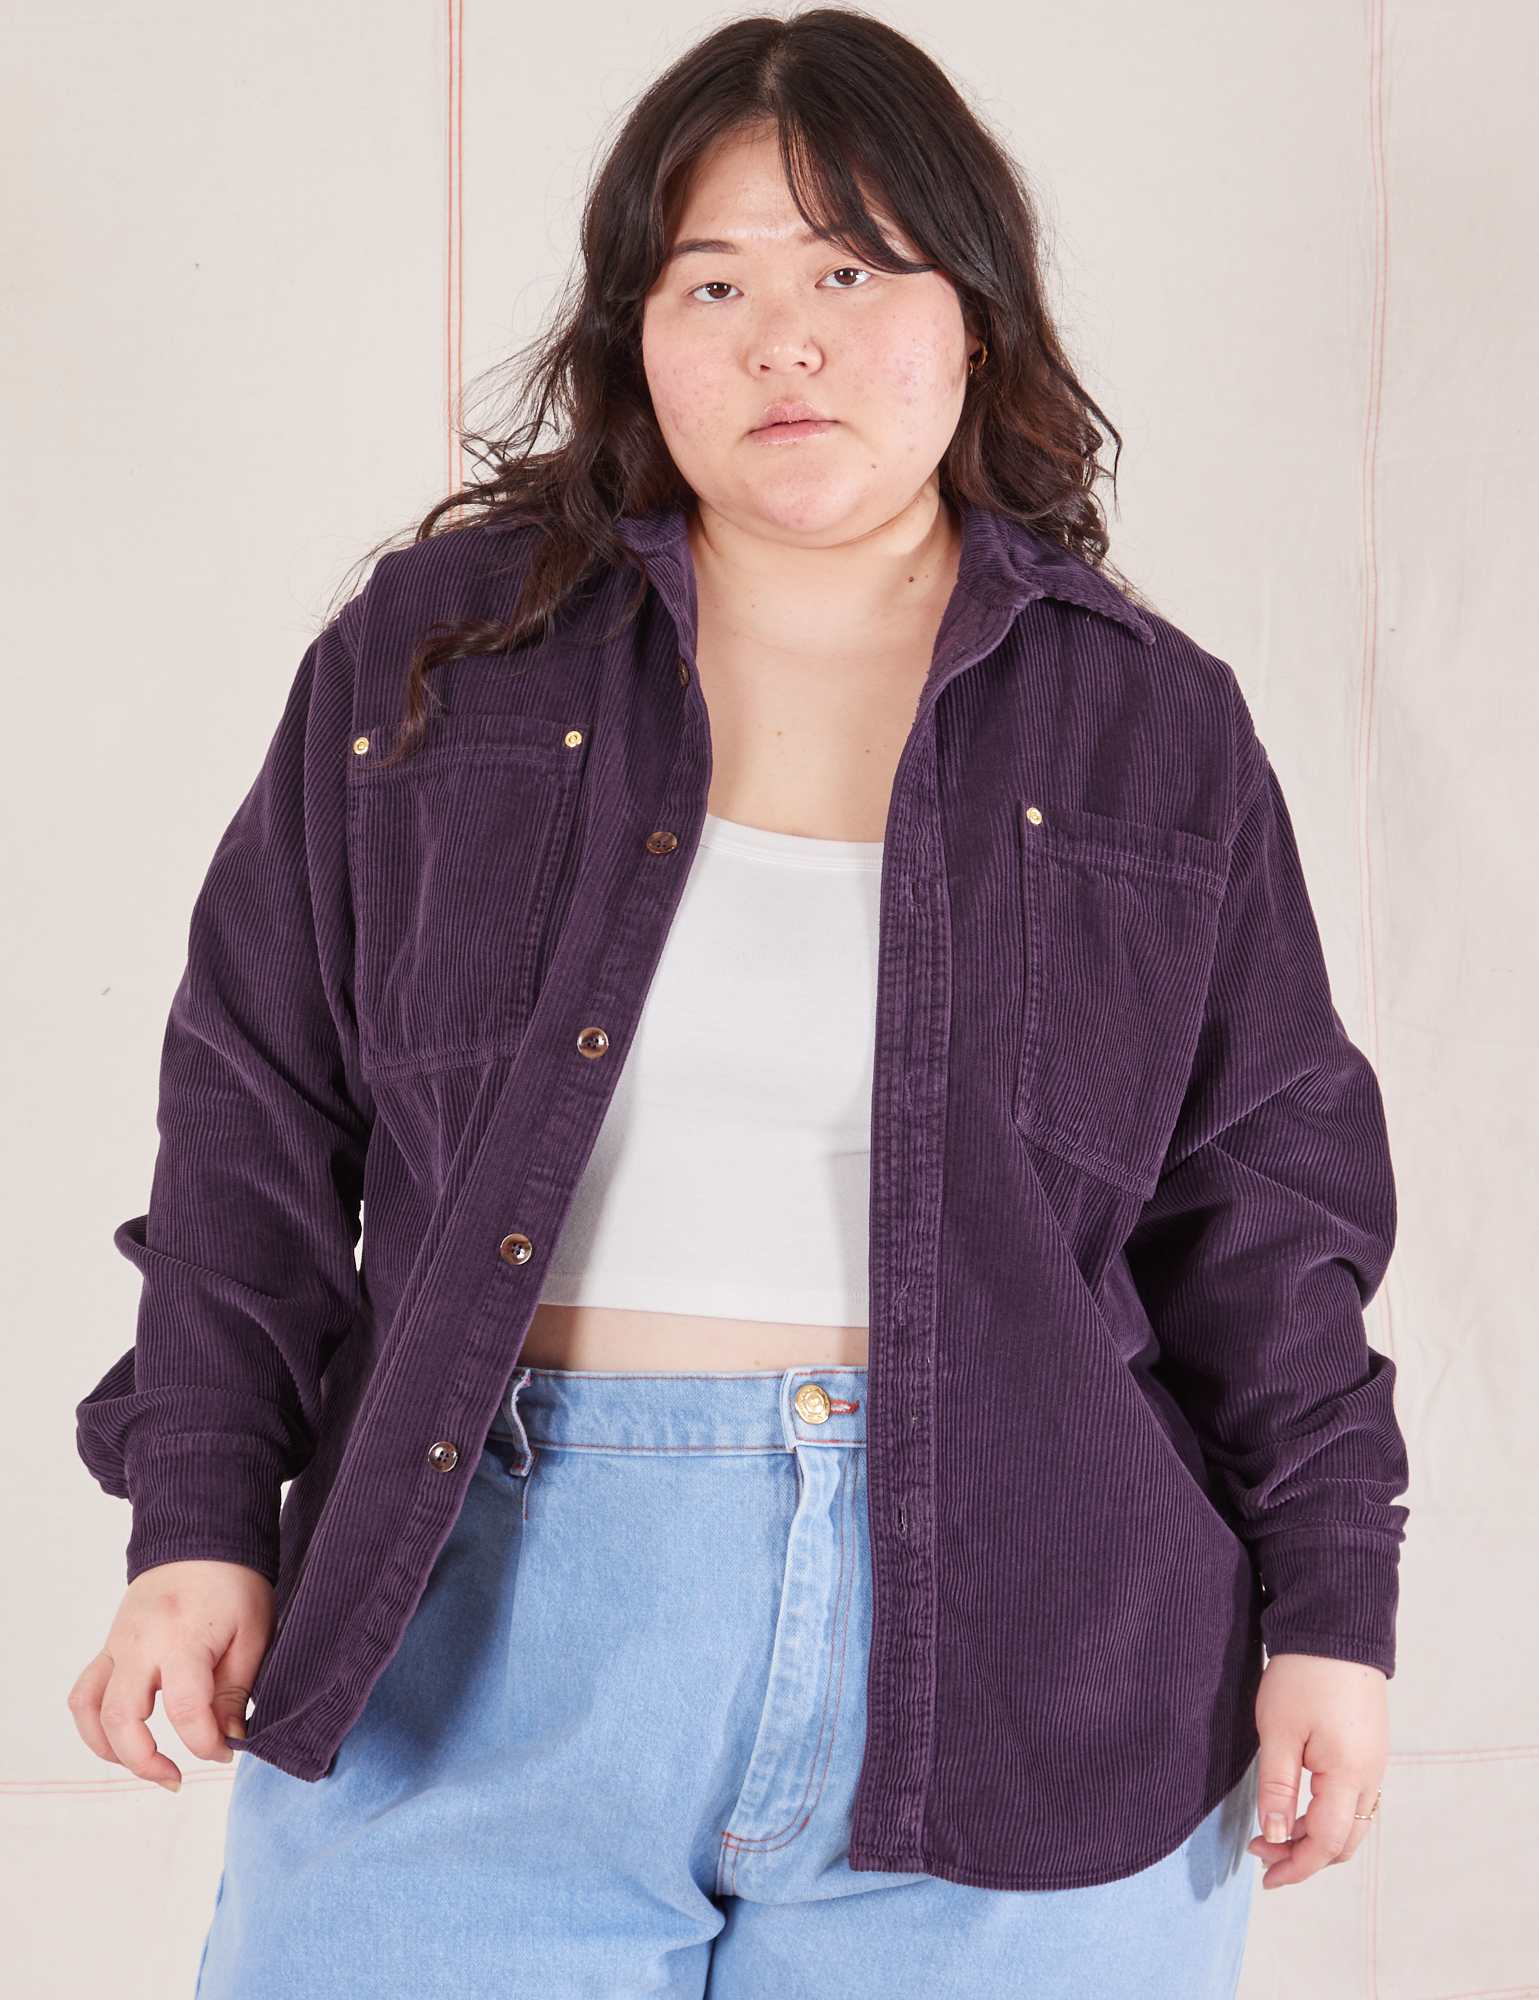 Ashley is wearing Corduroy Overshirt in Nebula Purple with a vintage off-white Cropped Cami underneath paired with light wash Denim Trouser Jeans